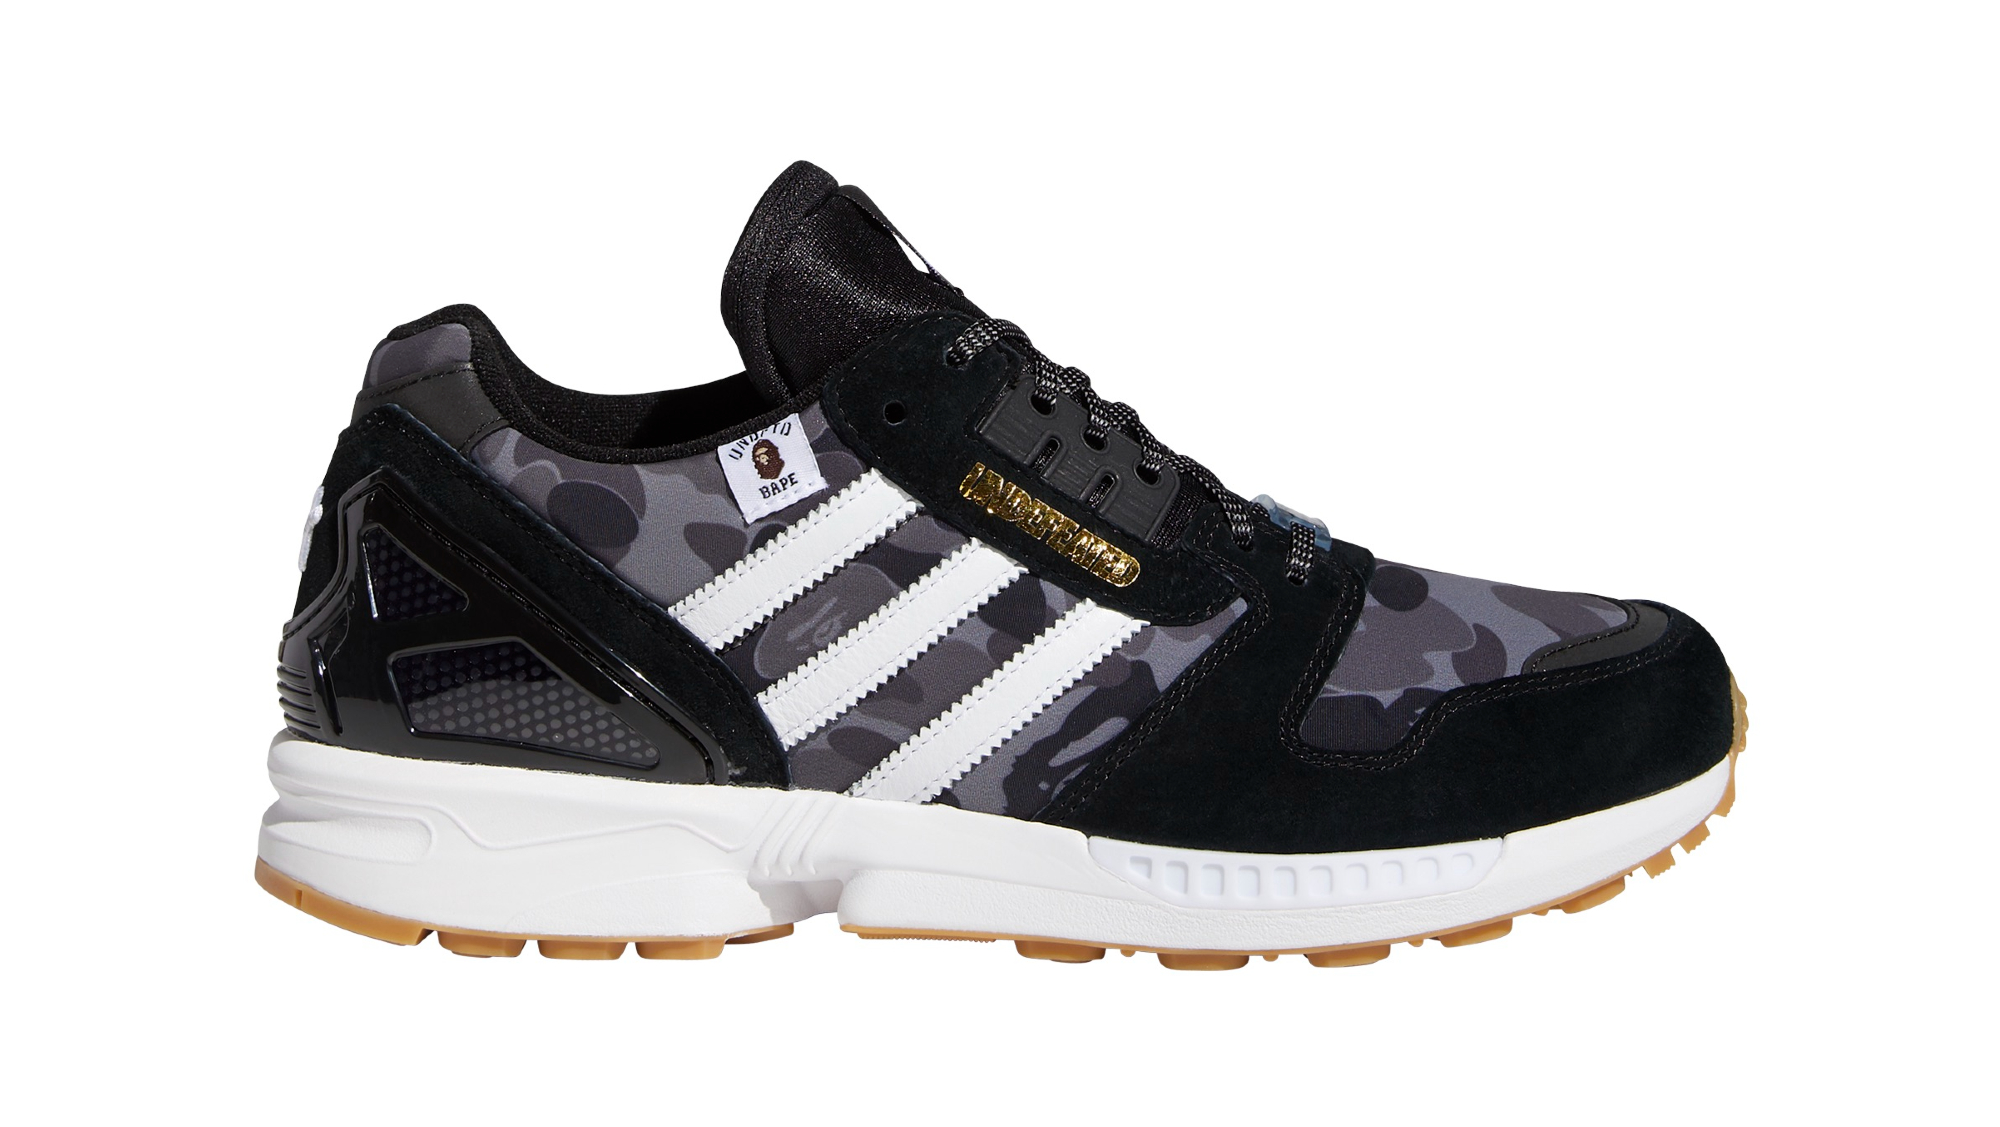 Bape x Undefeated x Adidas ZX 8000 FY8852 Release Date